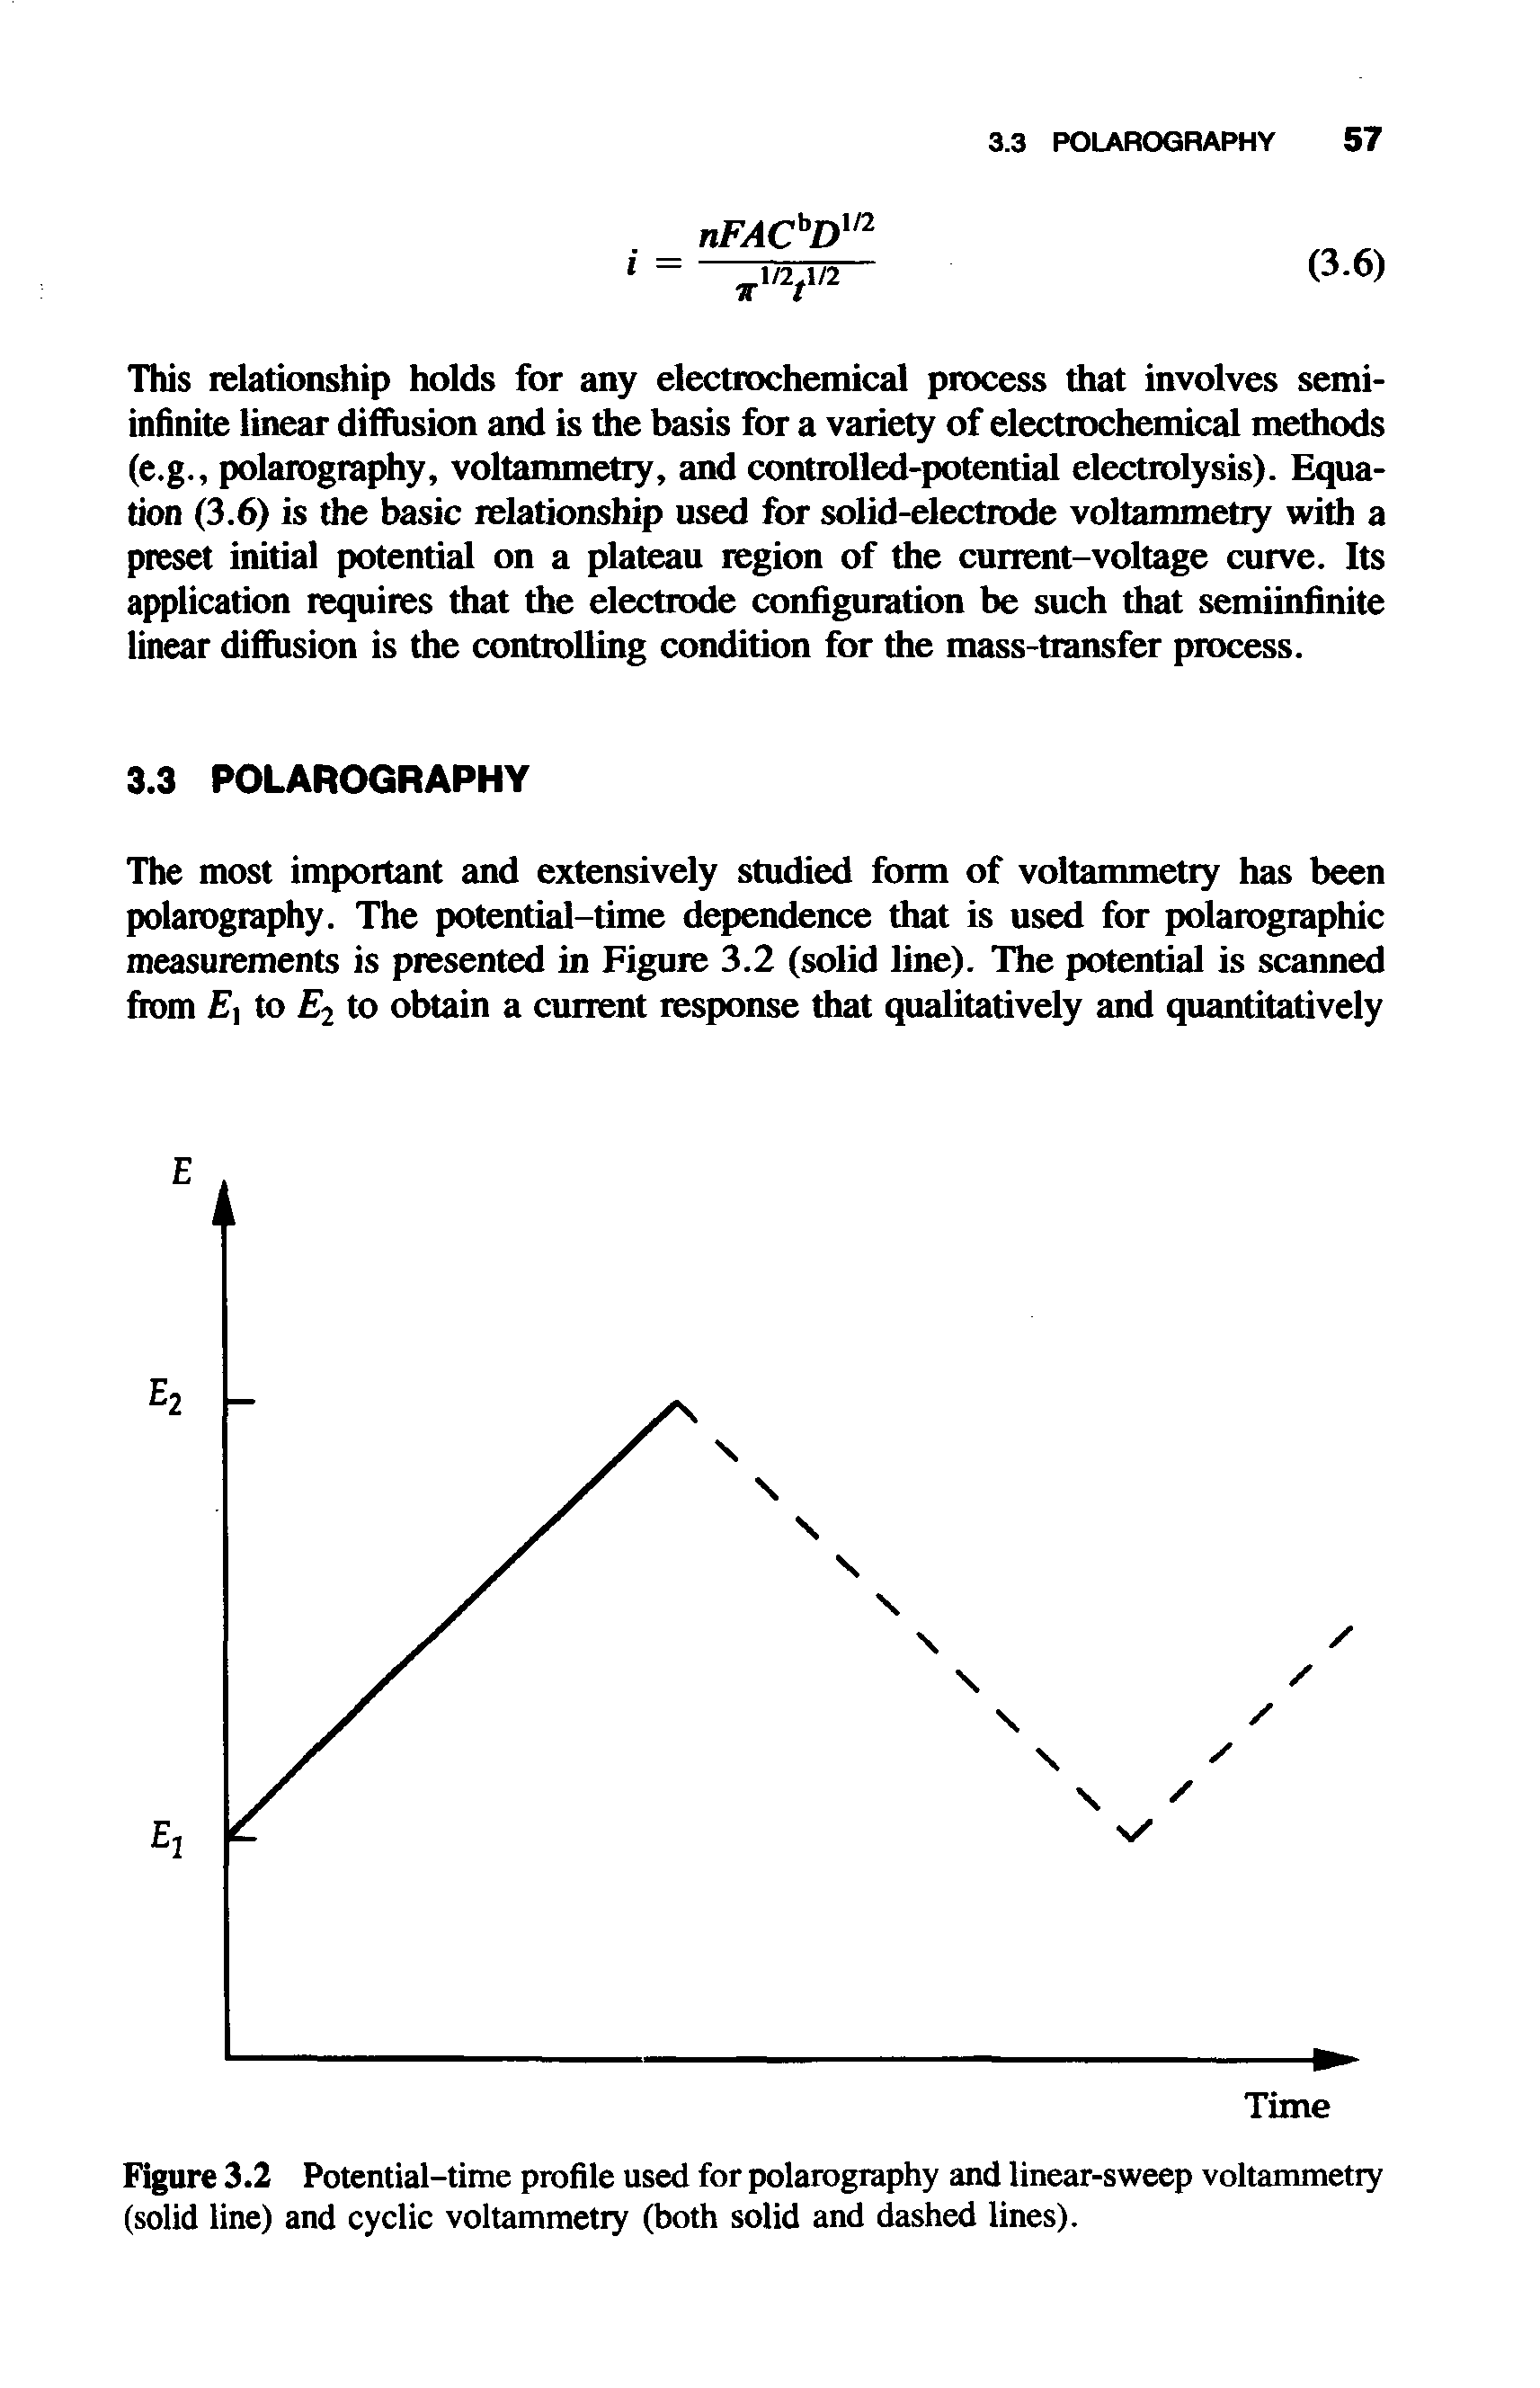 Figure 3.2 Potential-time profile used for polarography and linear-sweep voltammetry (solid line) and cyclic voltammetry (both solid and dashed lines).